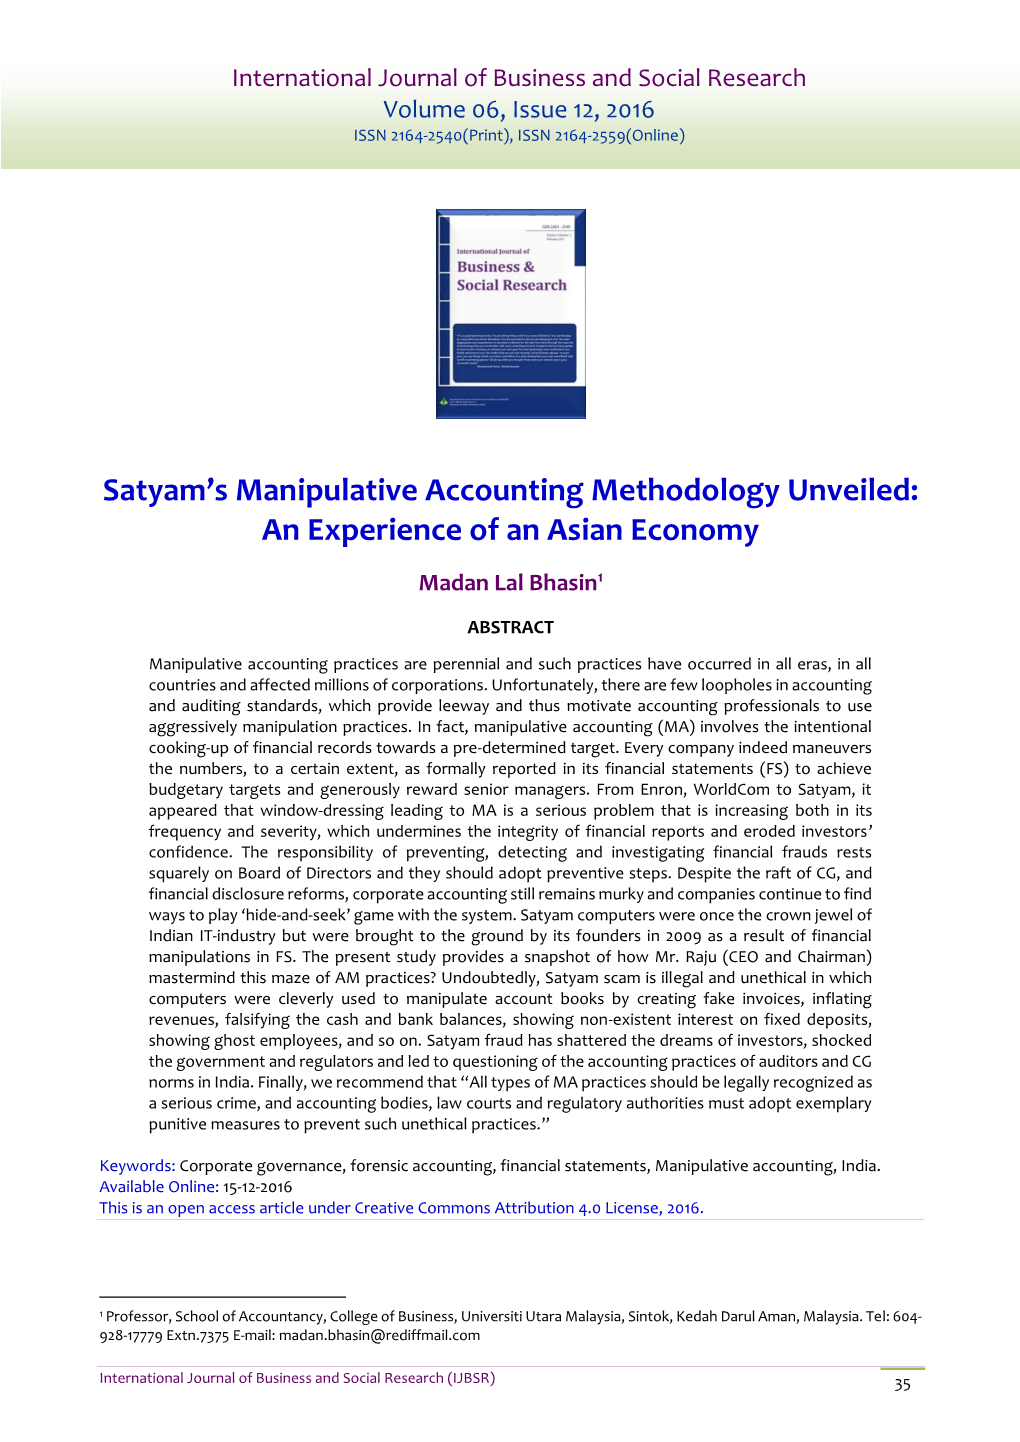 Satyam's Manipulative Accounting Methodology Unveiled: an Experience of an Asian Economy